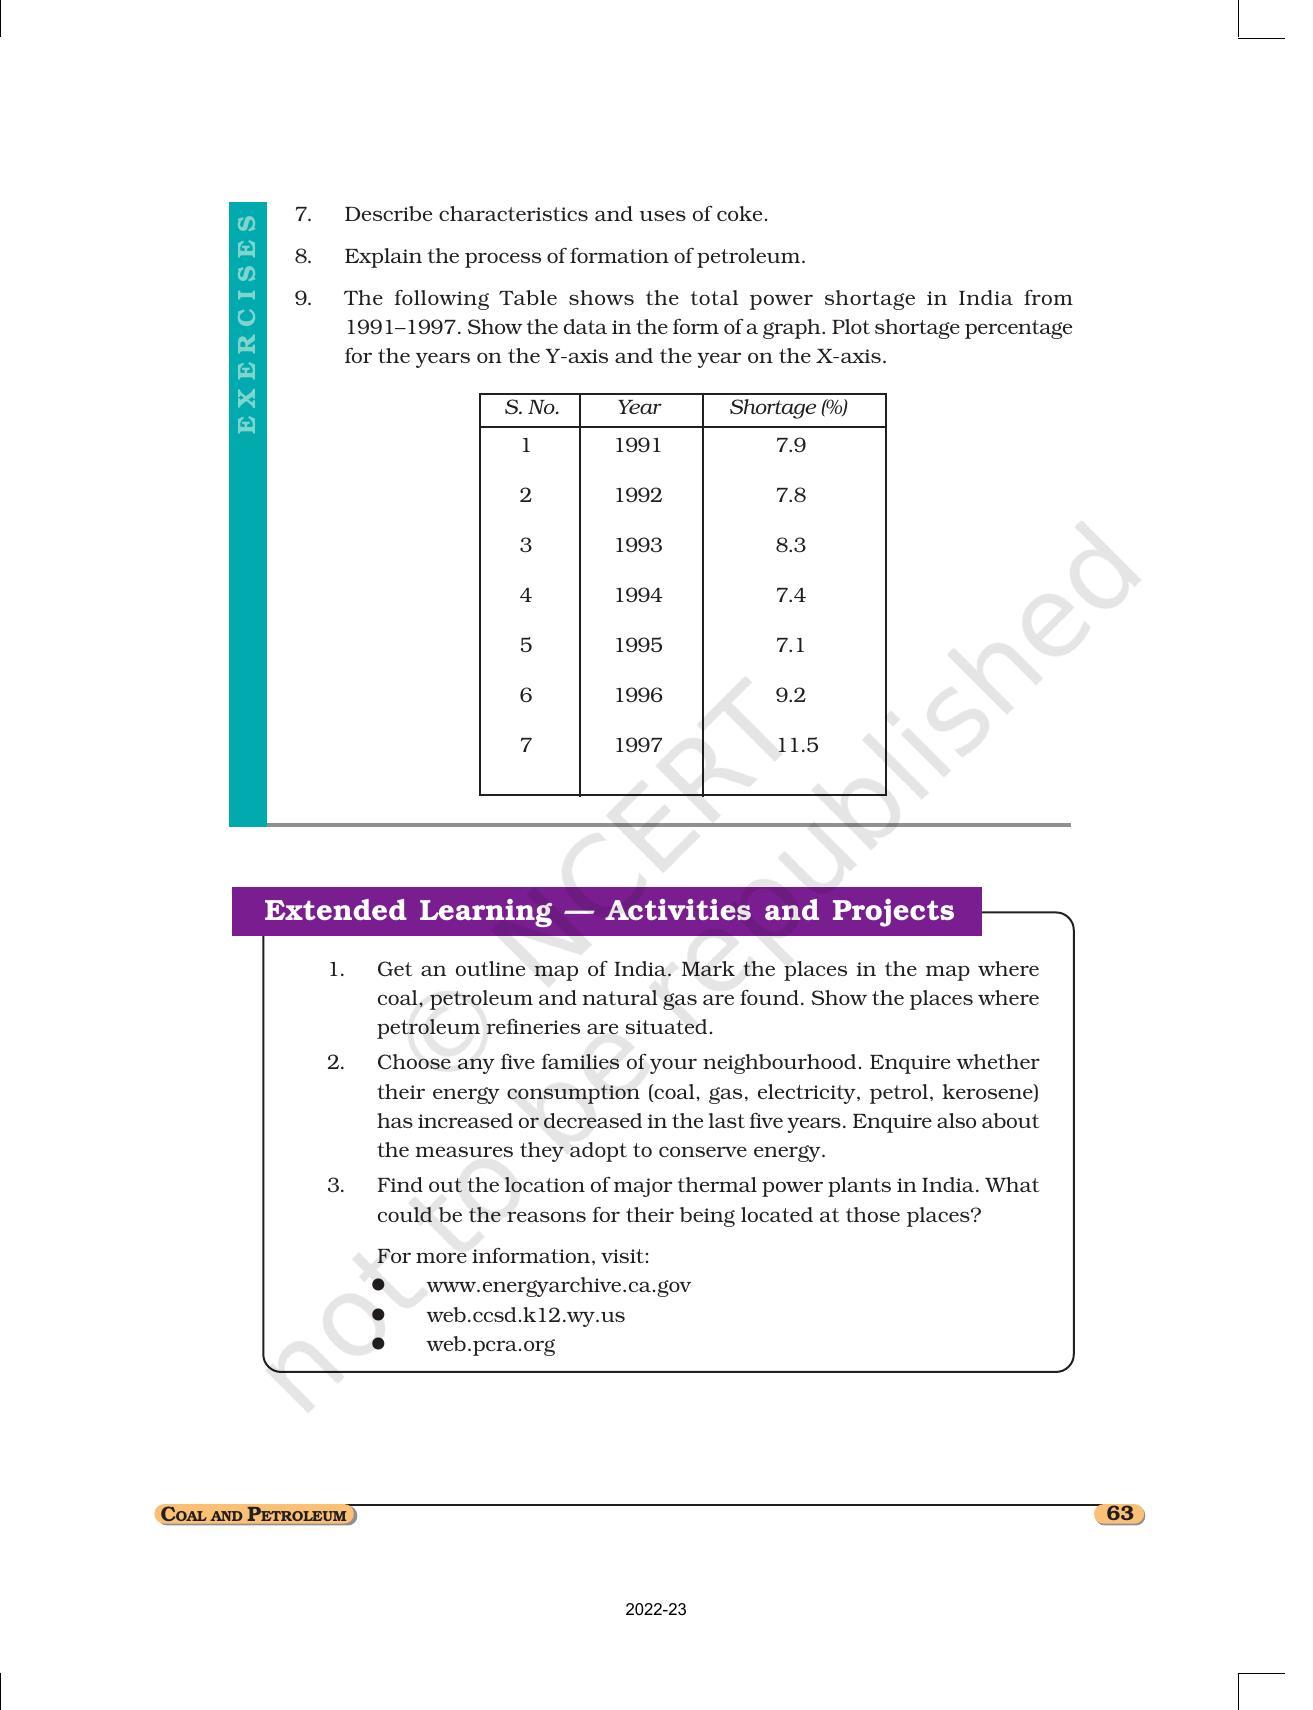 NCERT Book for Class 8 Science Chapter 5 Coal and Petroleum - Page 8